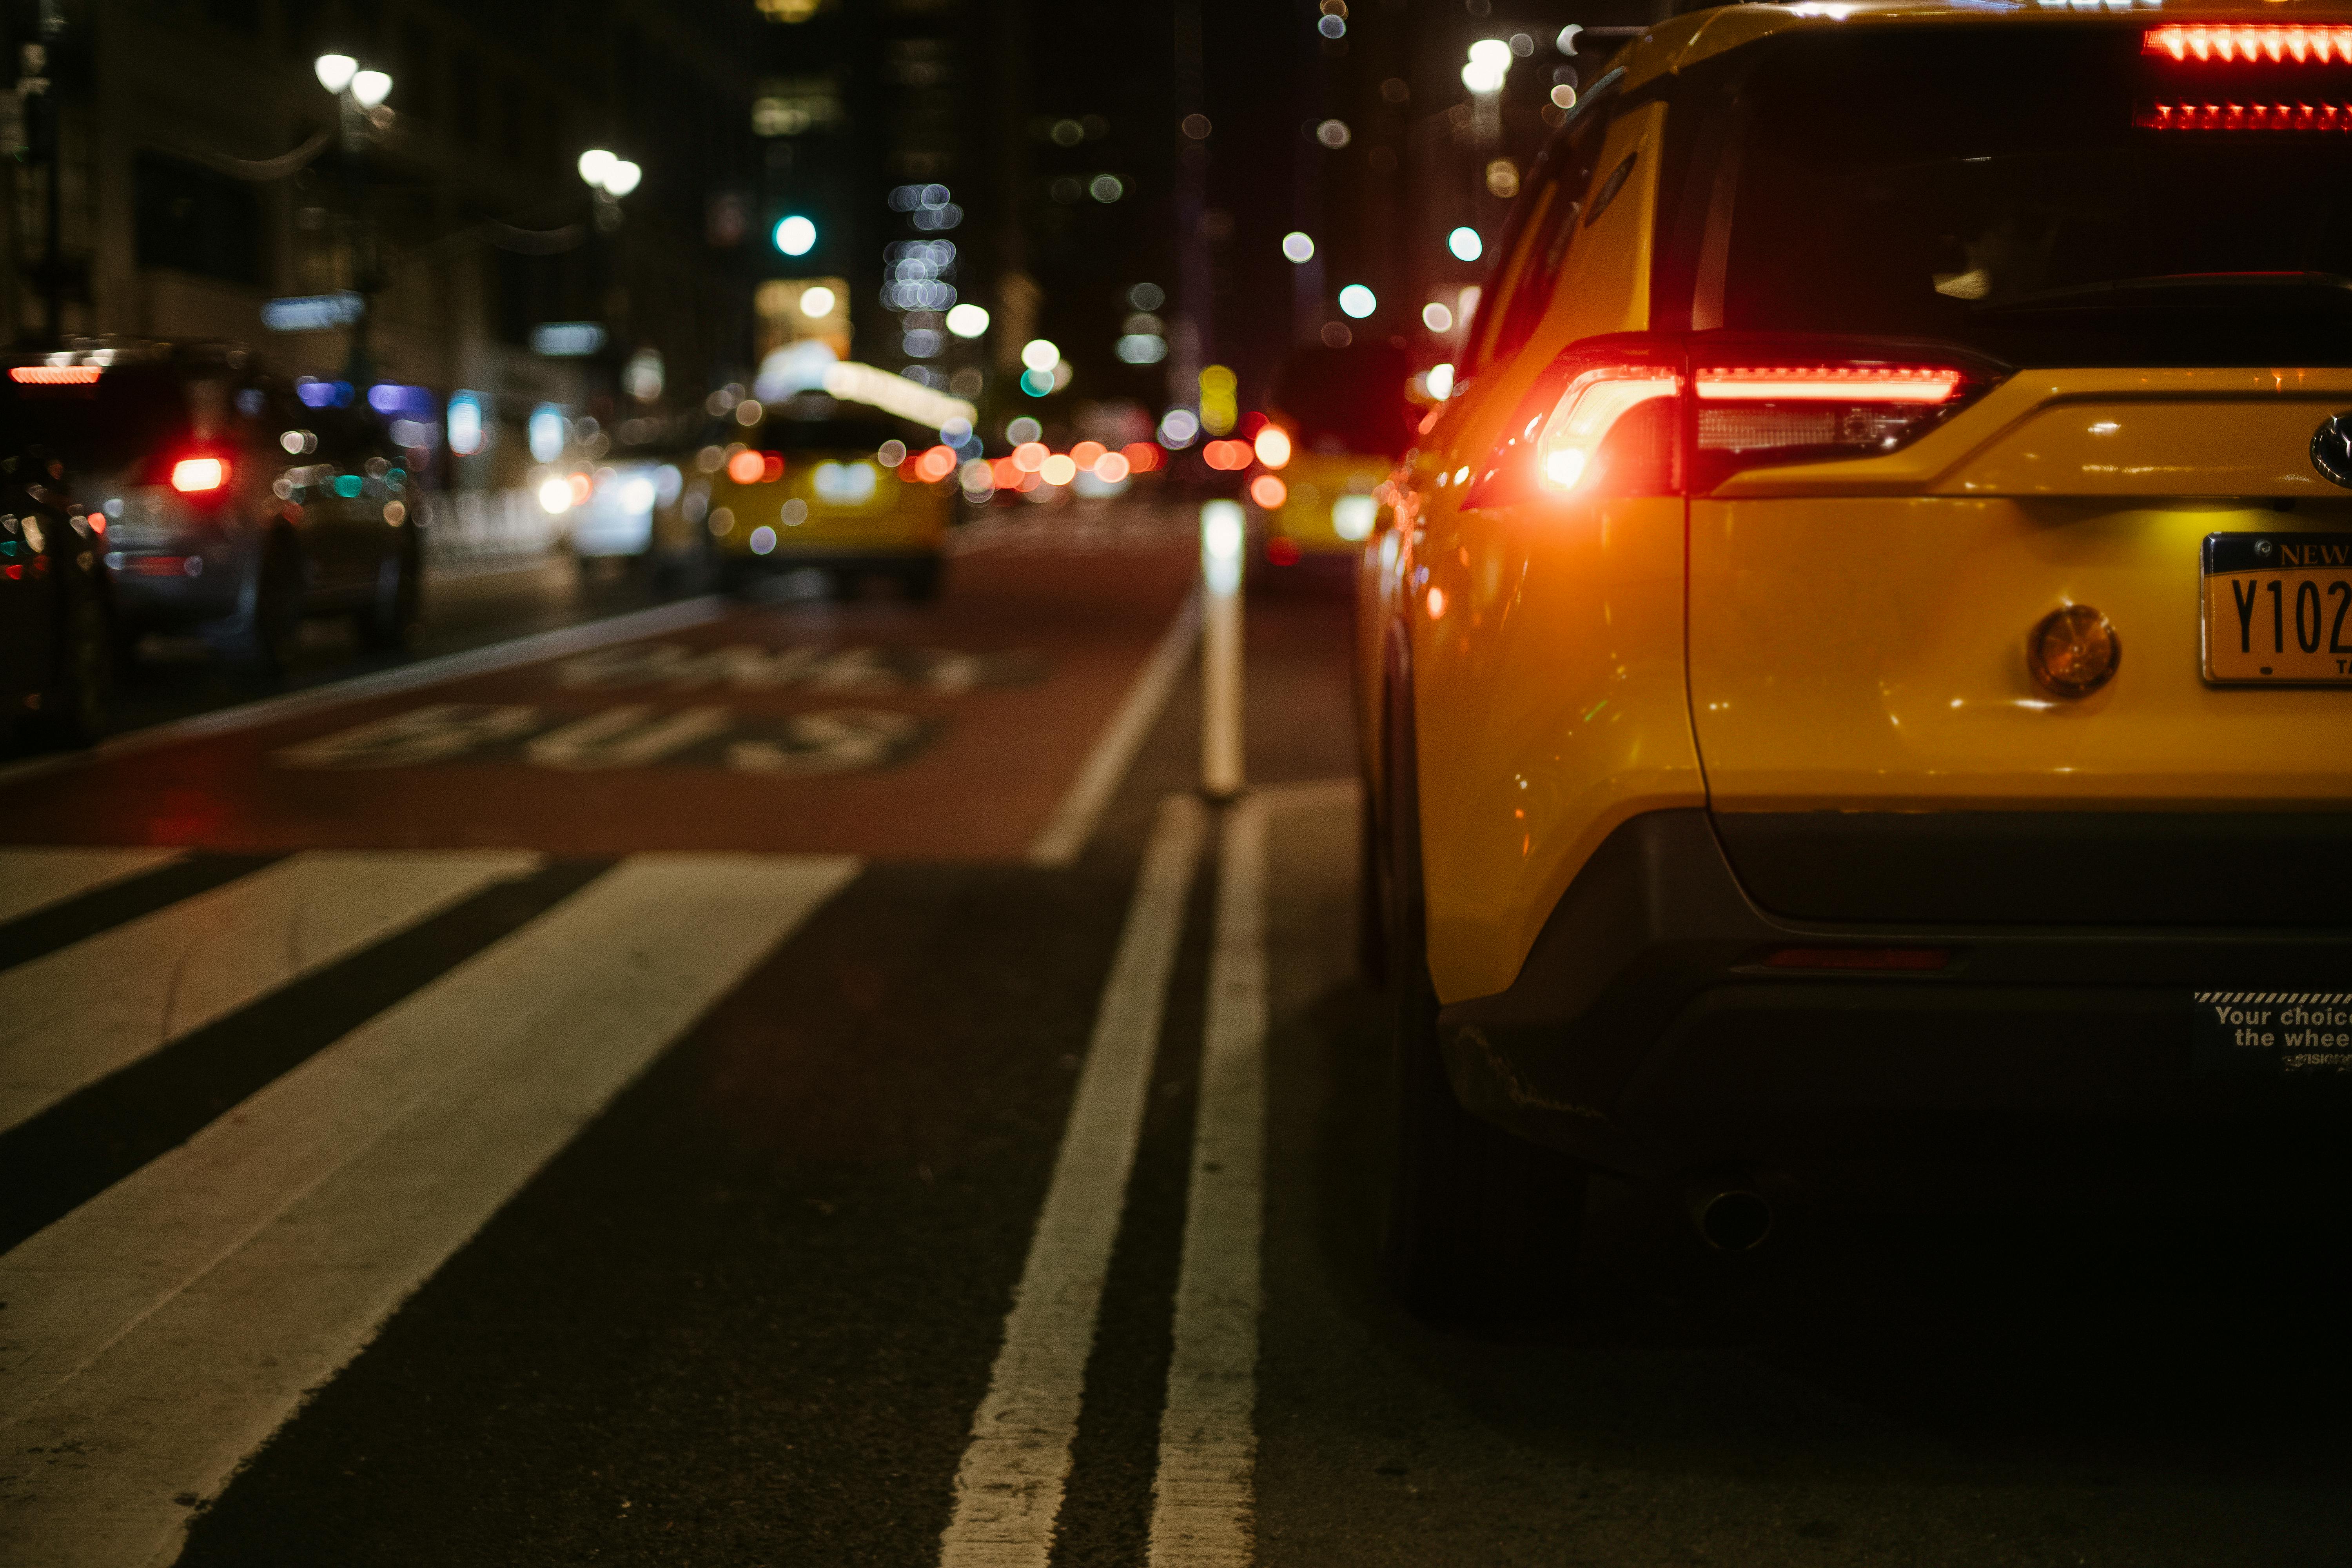 An automobile on the road at night | Source: Pexels